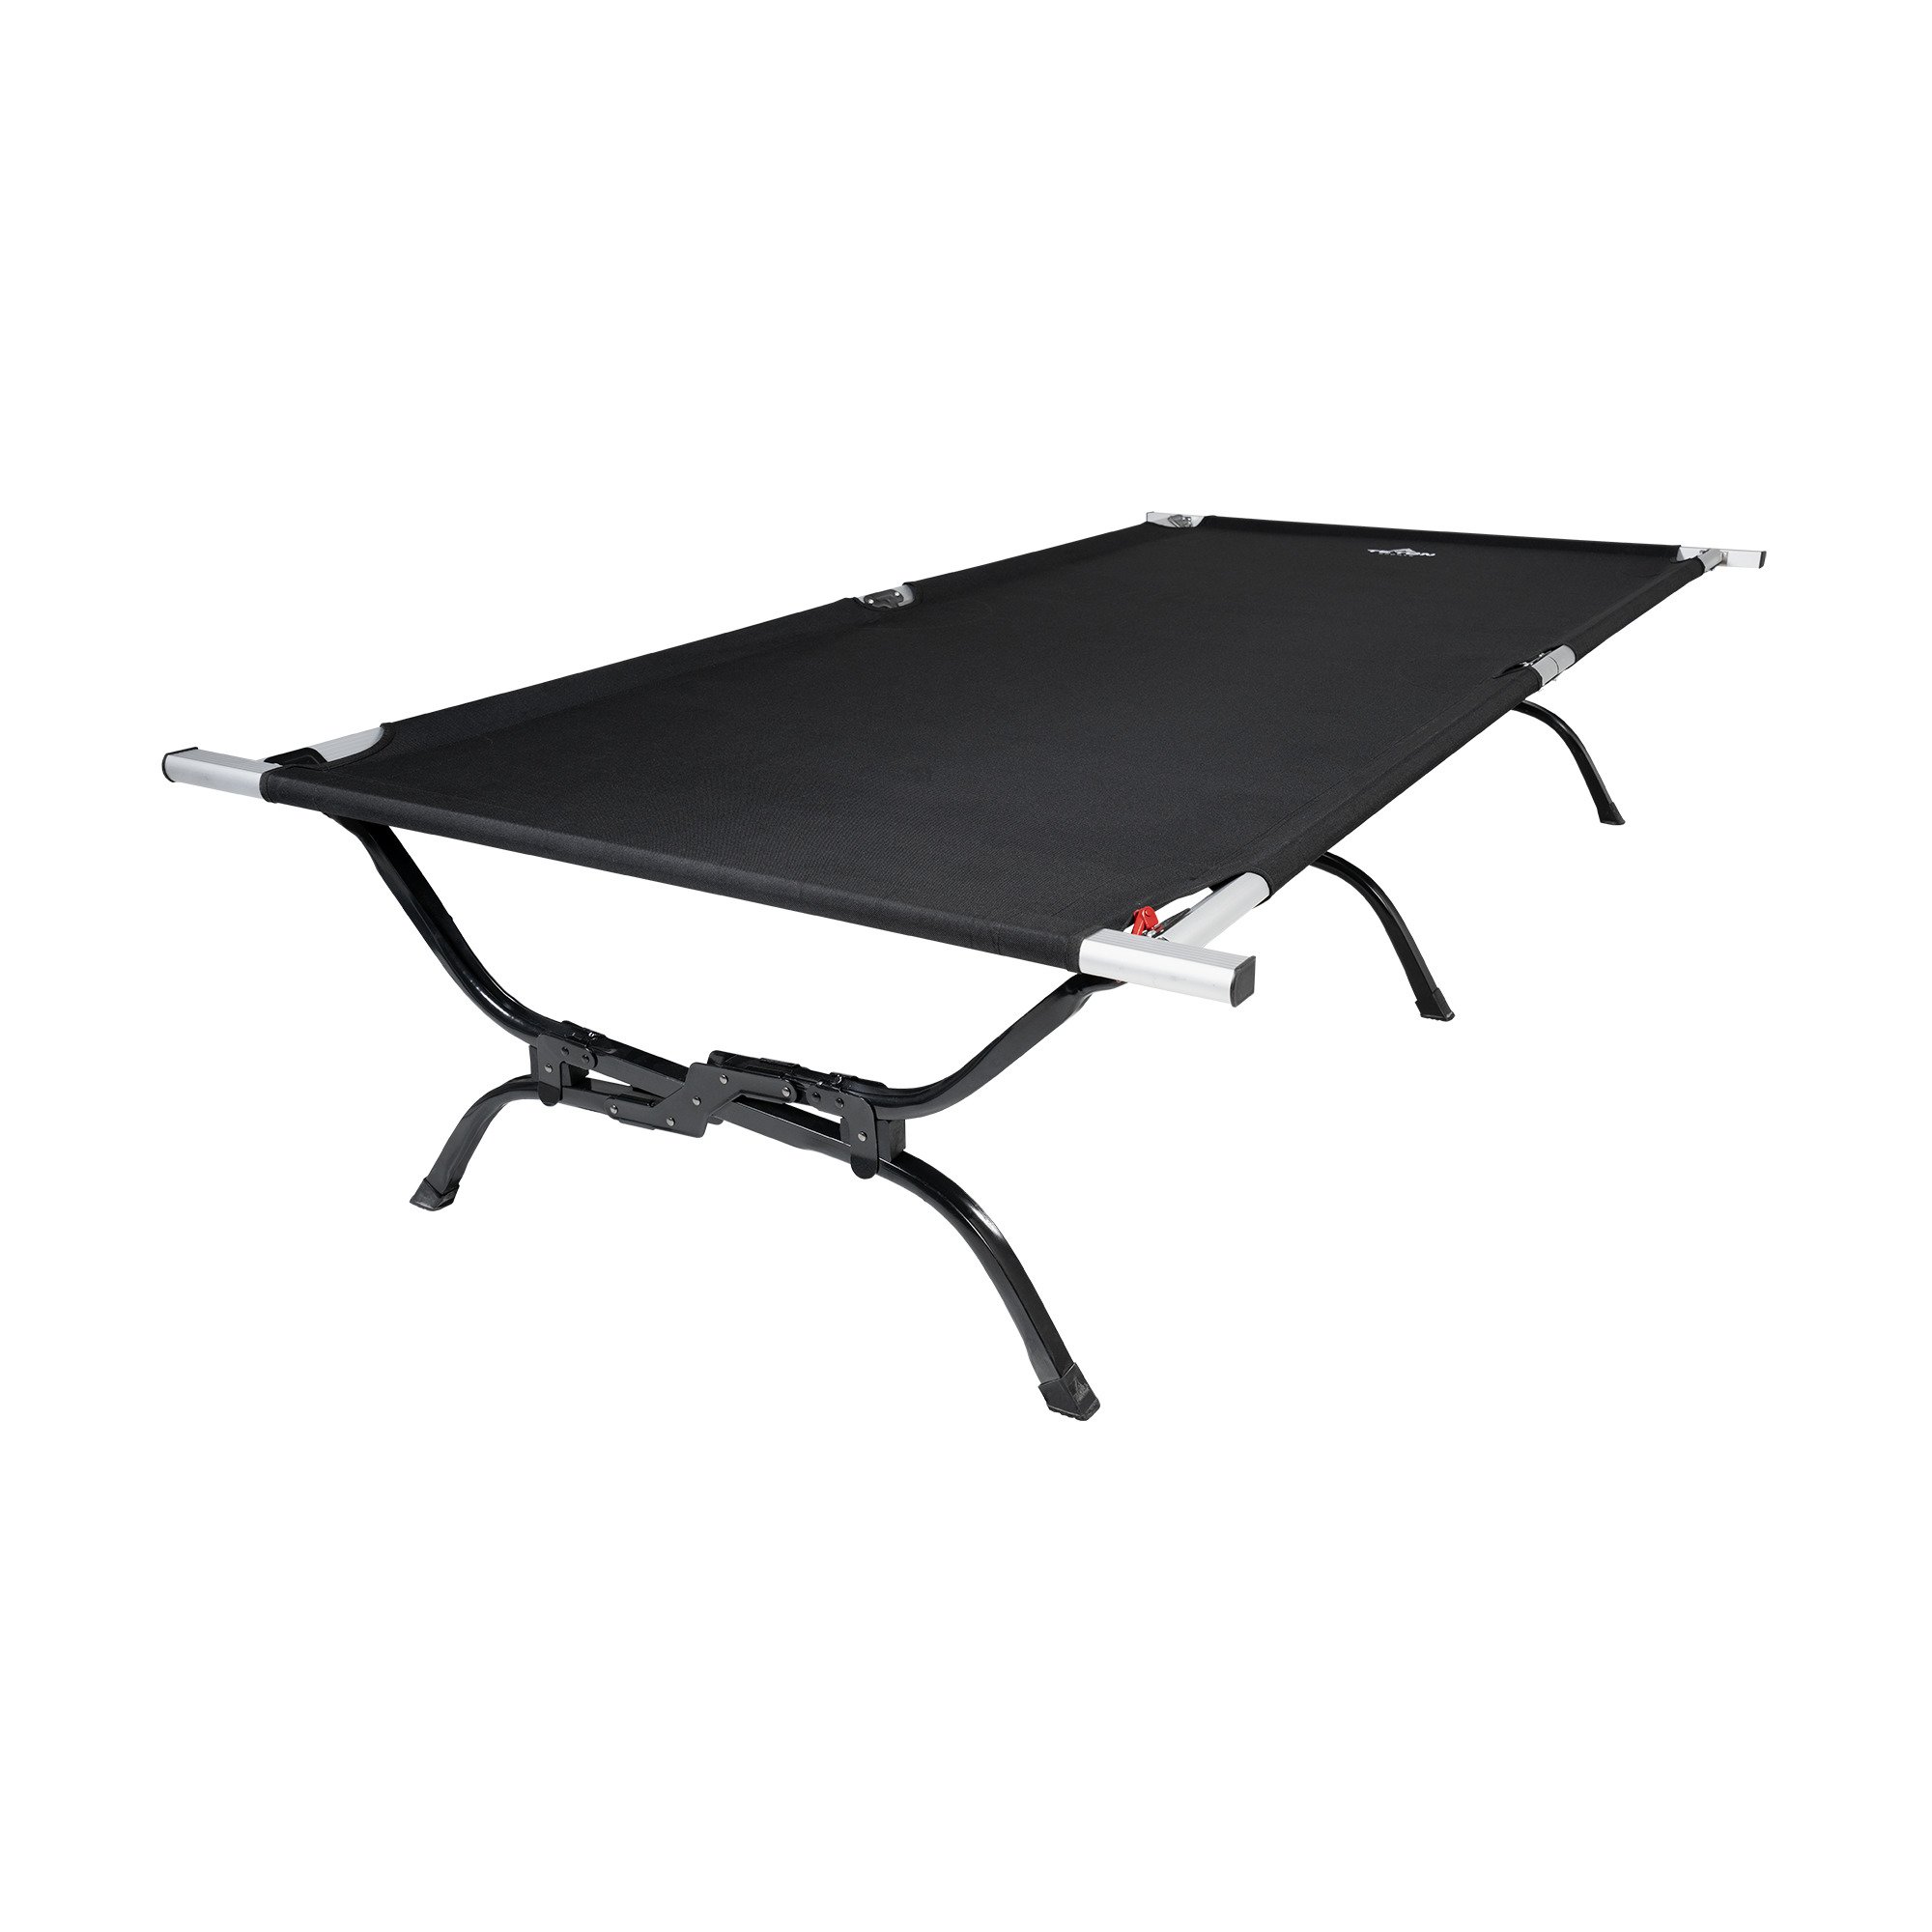 OUTFITTER XXL COT (LIMITED EDITION)